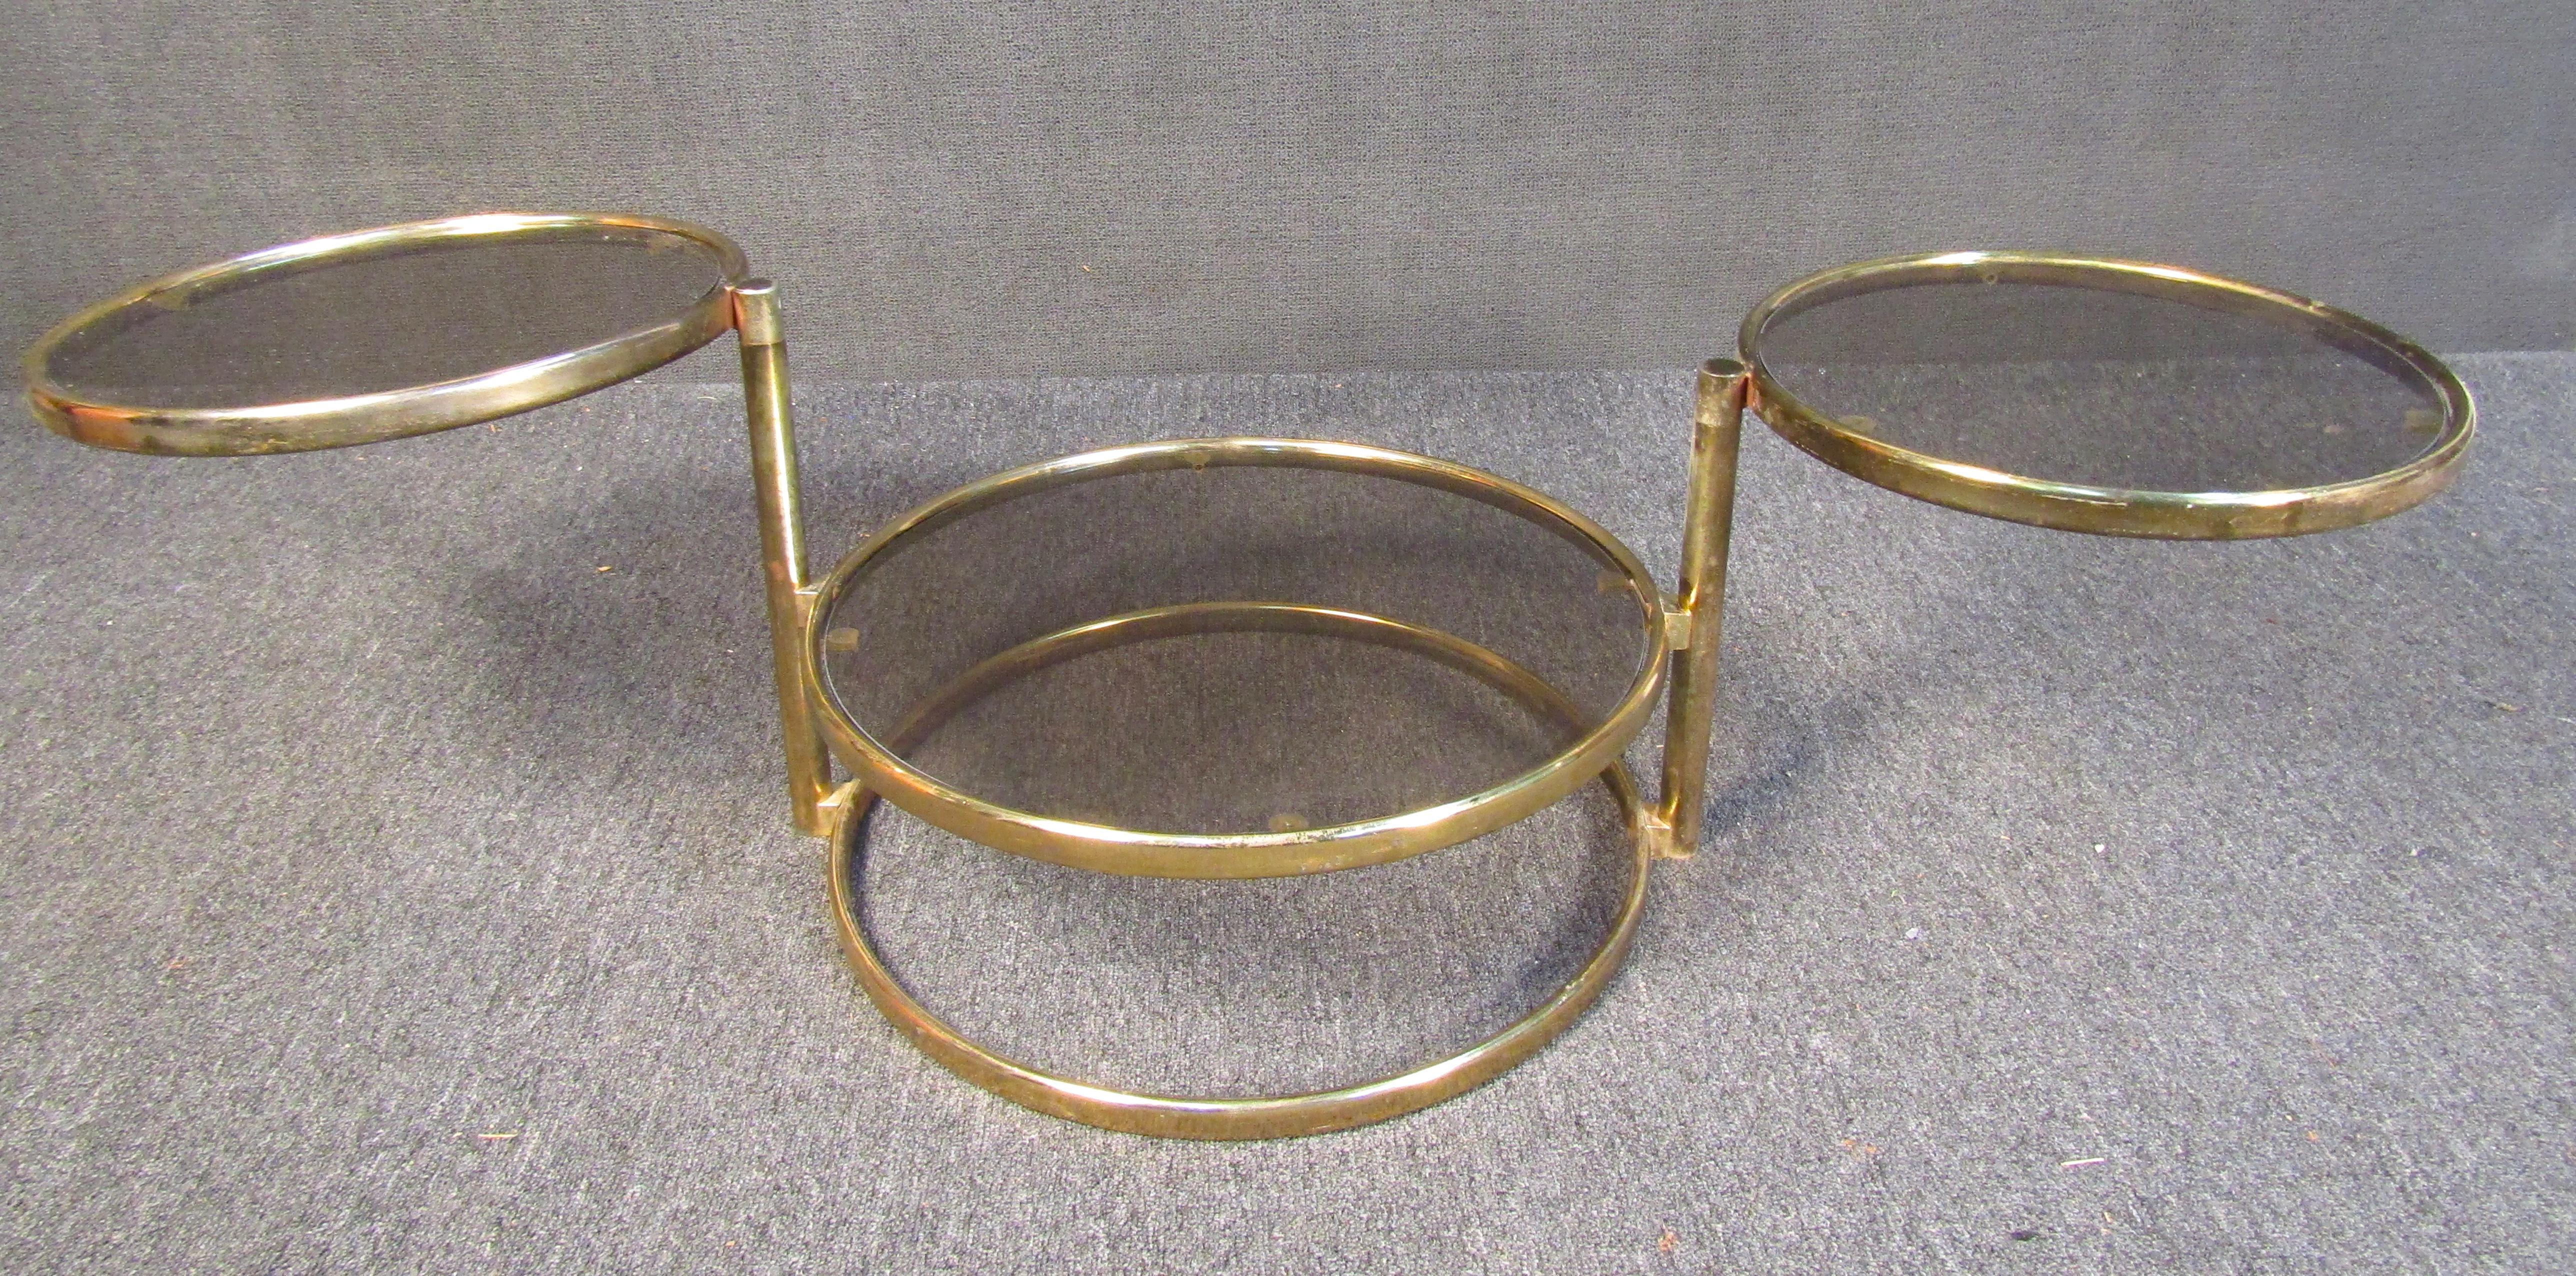 Unique Mid-Century Modern Adjustable Brass Hoop Table In Good Condition For Sale In Brooklyn, NY